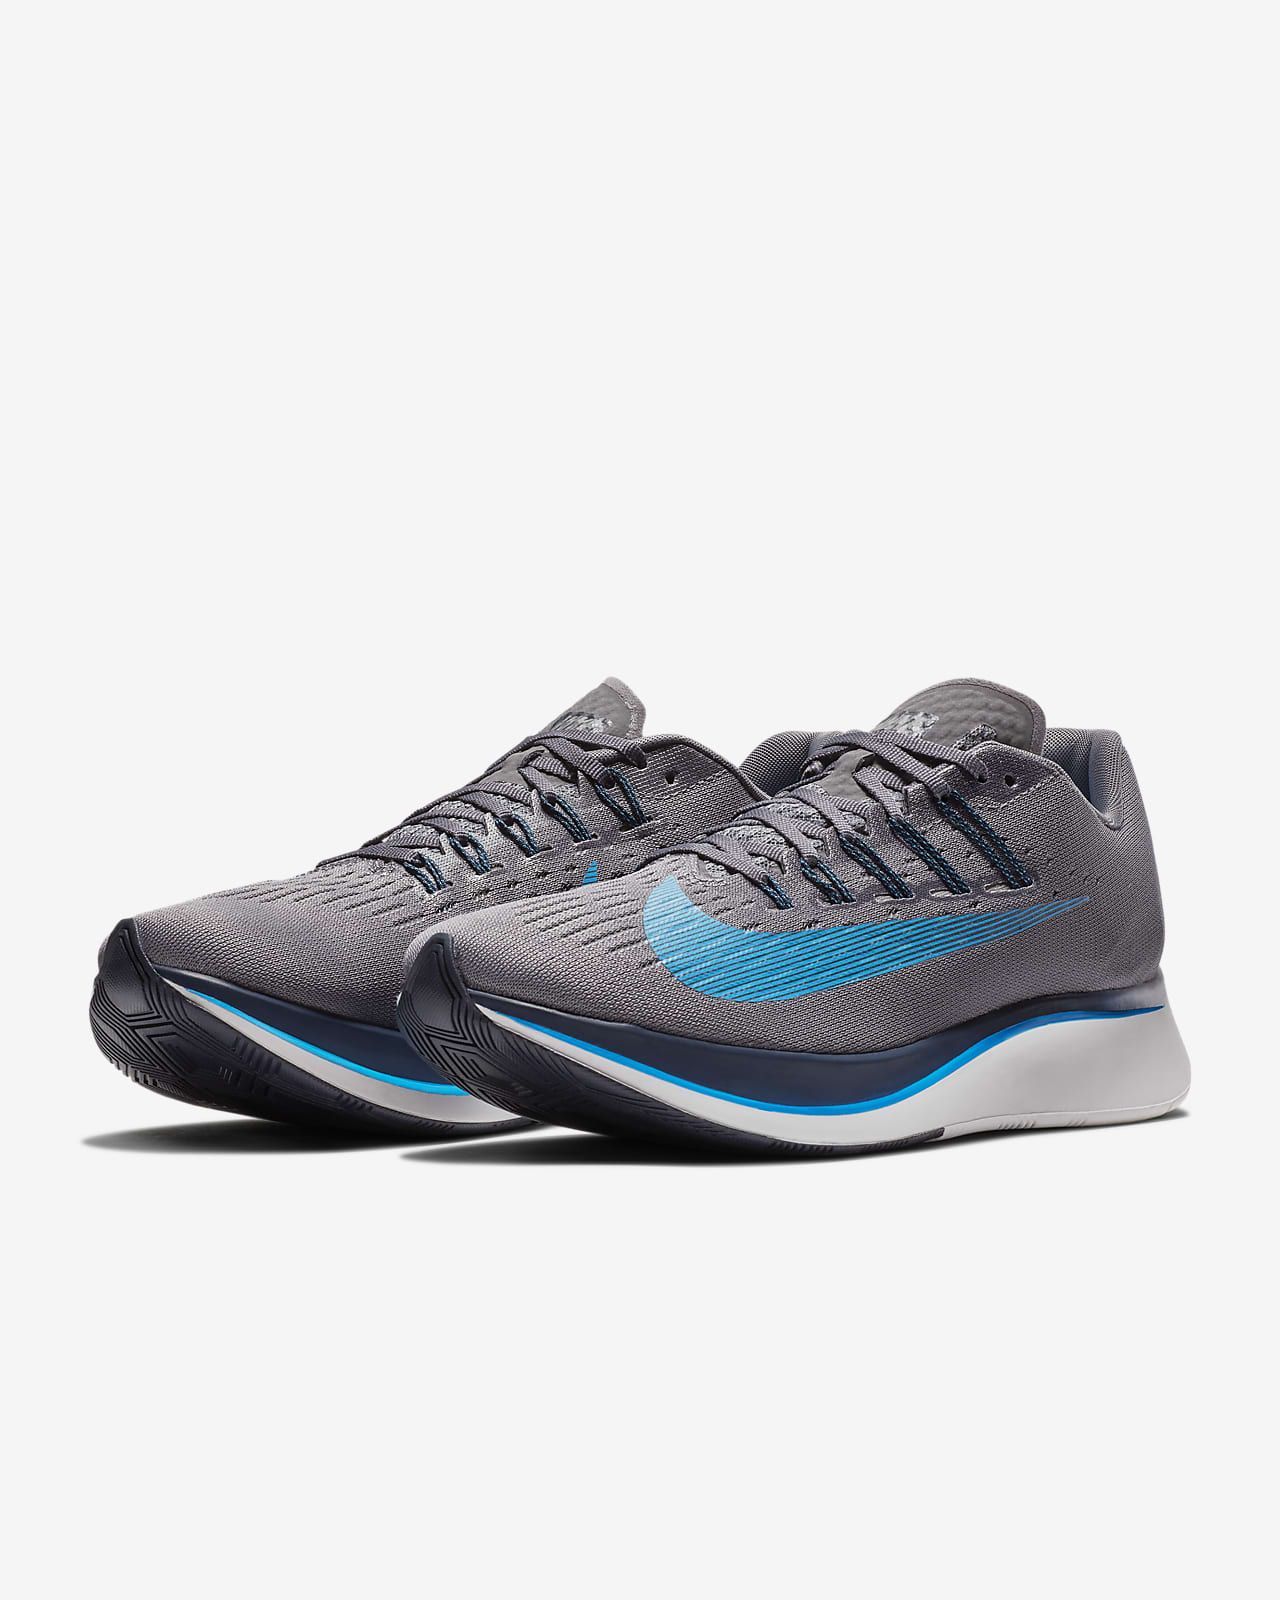 nike zoom fly flyknit running shoes - su19